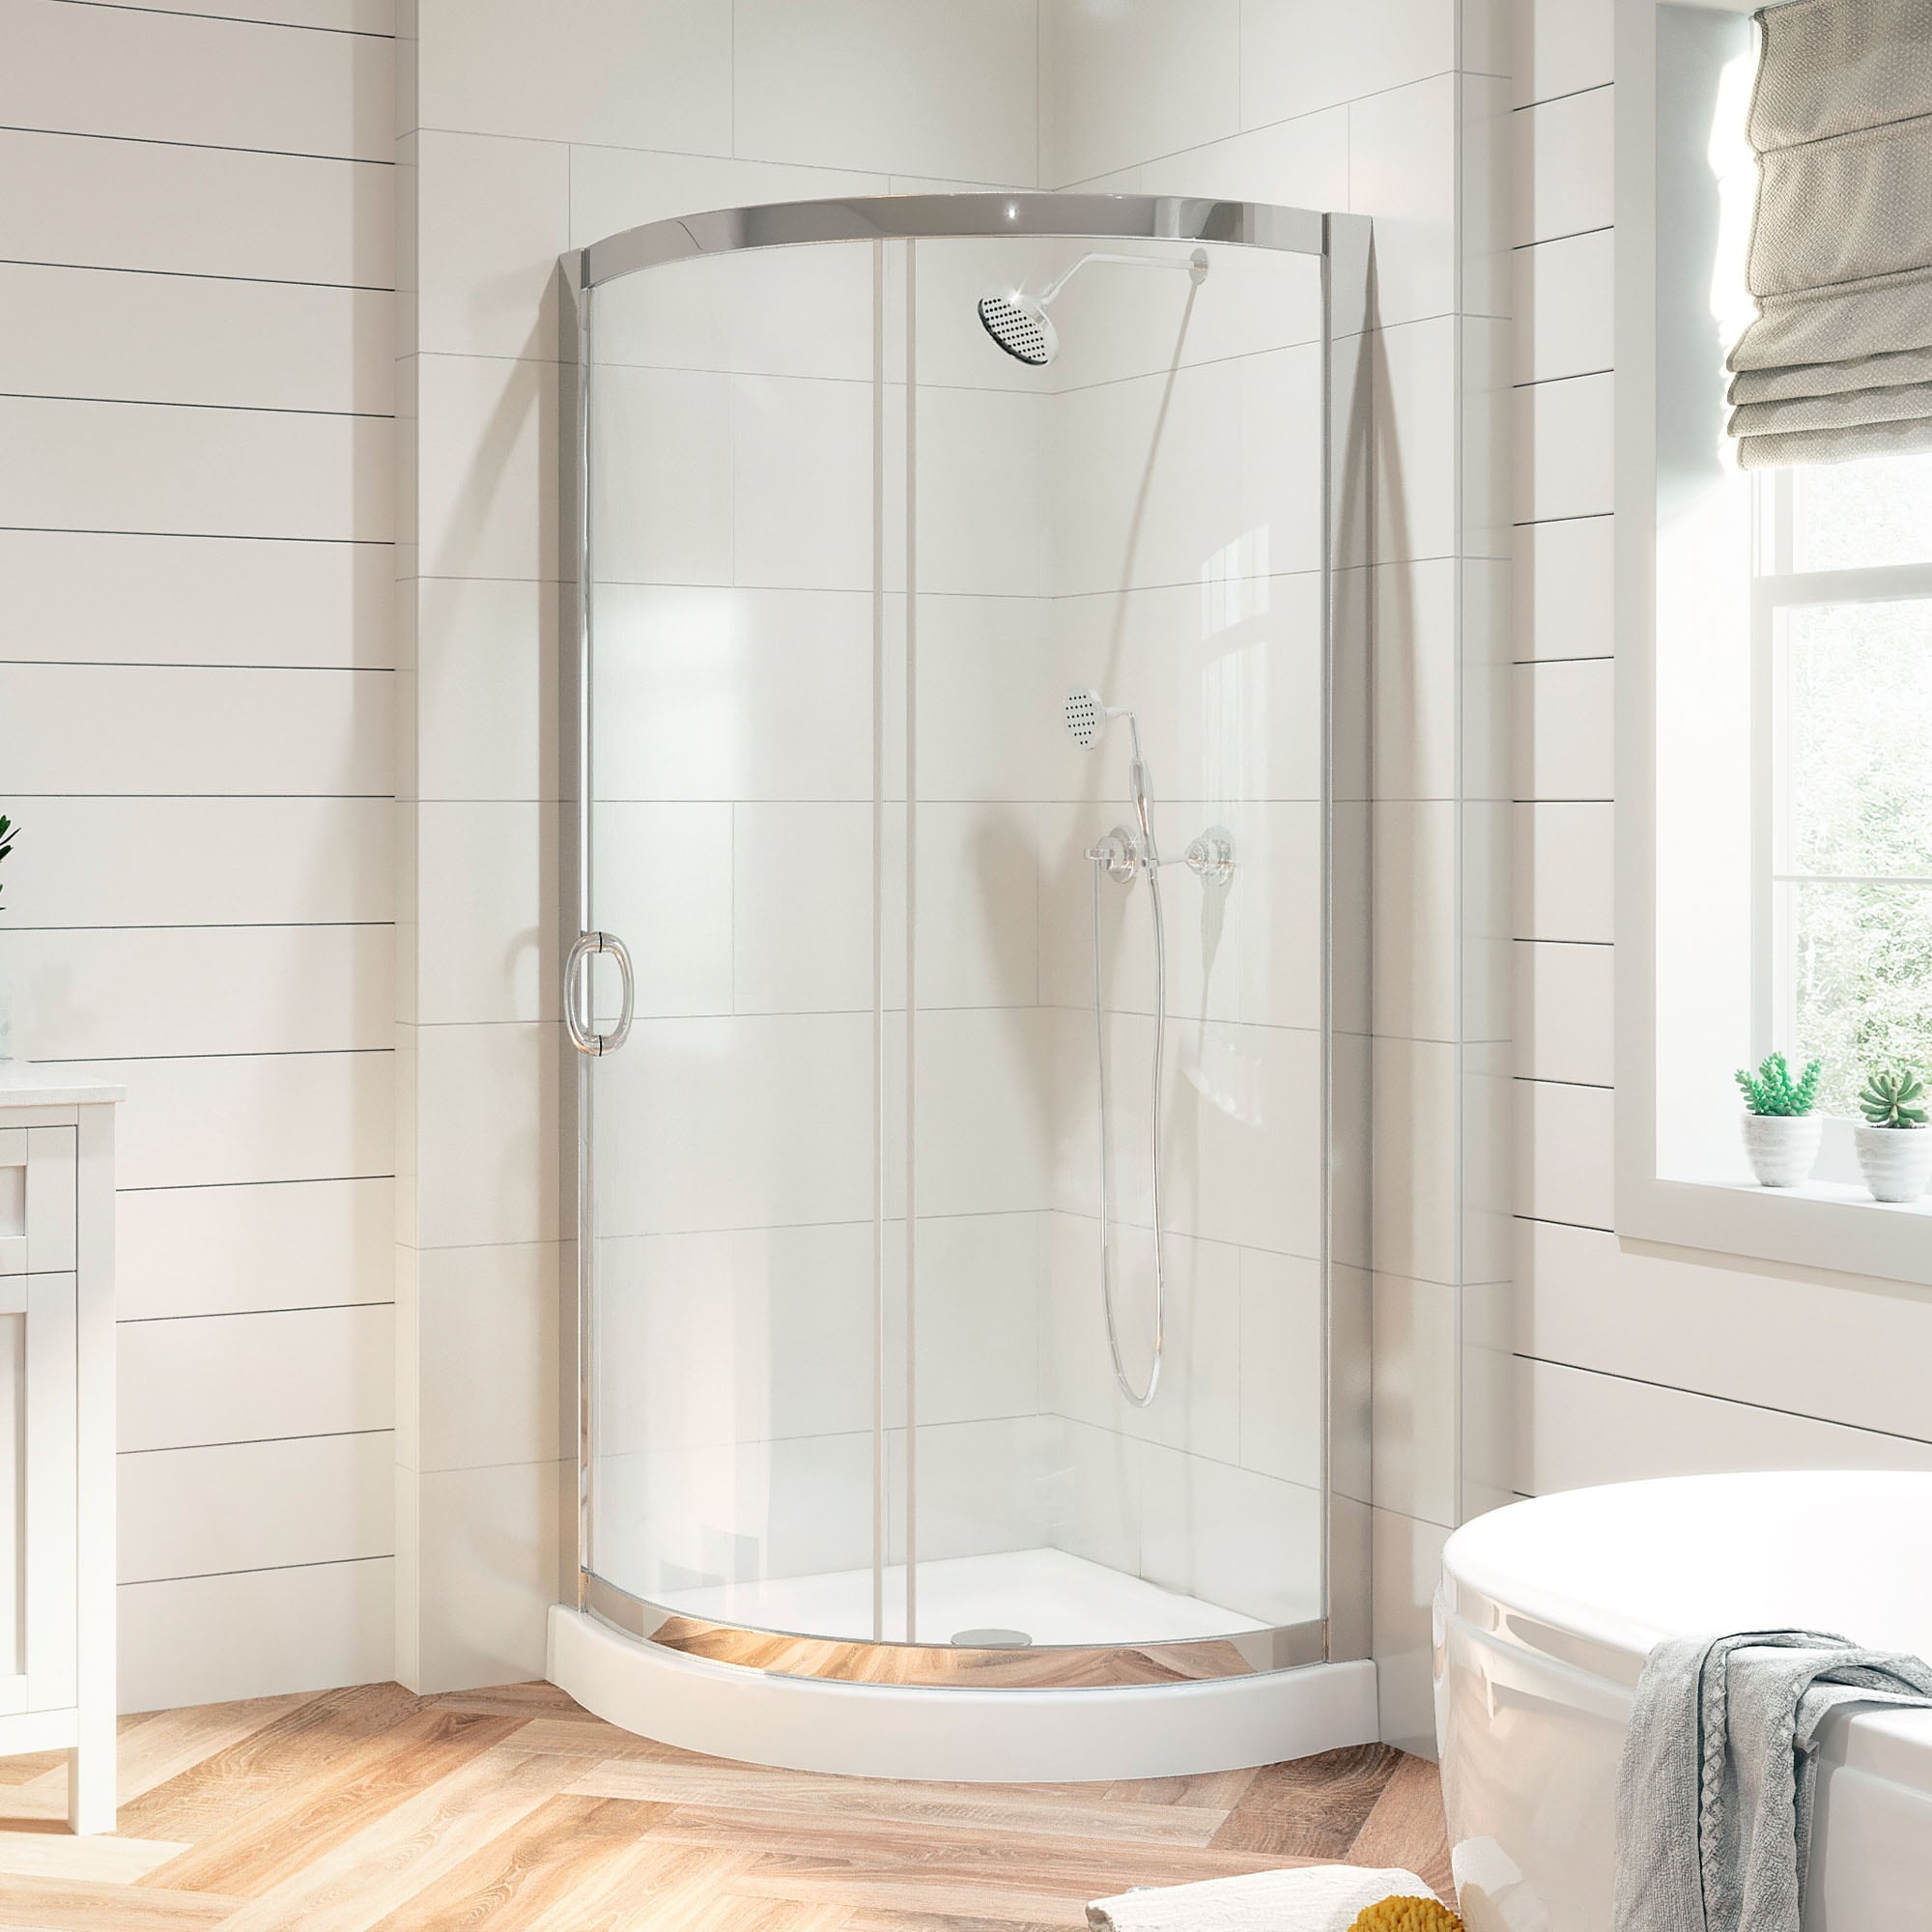 https://ak1.ostkcdn.com/images/products/is/images/direct/4064dadae86ab87e00b2e64d5a8588826eaff043/OVE-Decors-Breeze-32-in.-Corner-Shower-Sliding-Door-with-Base-and-Clear-Glass-in-Chrome.jpg